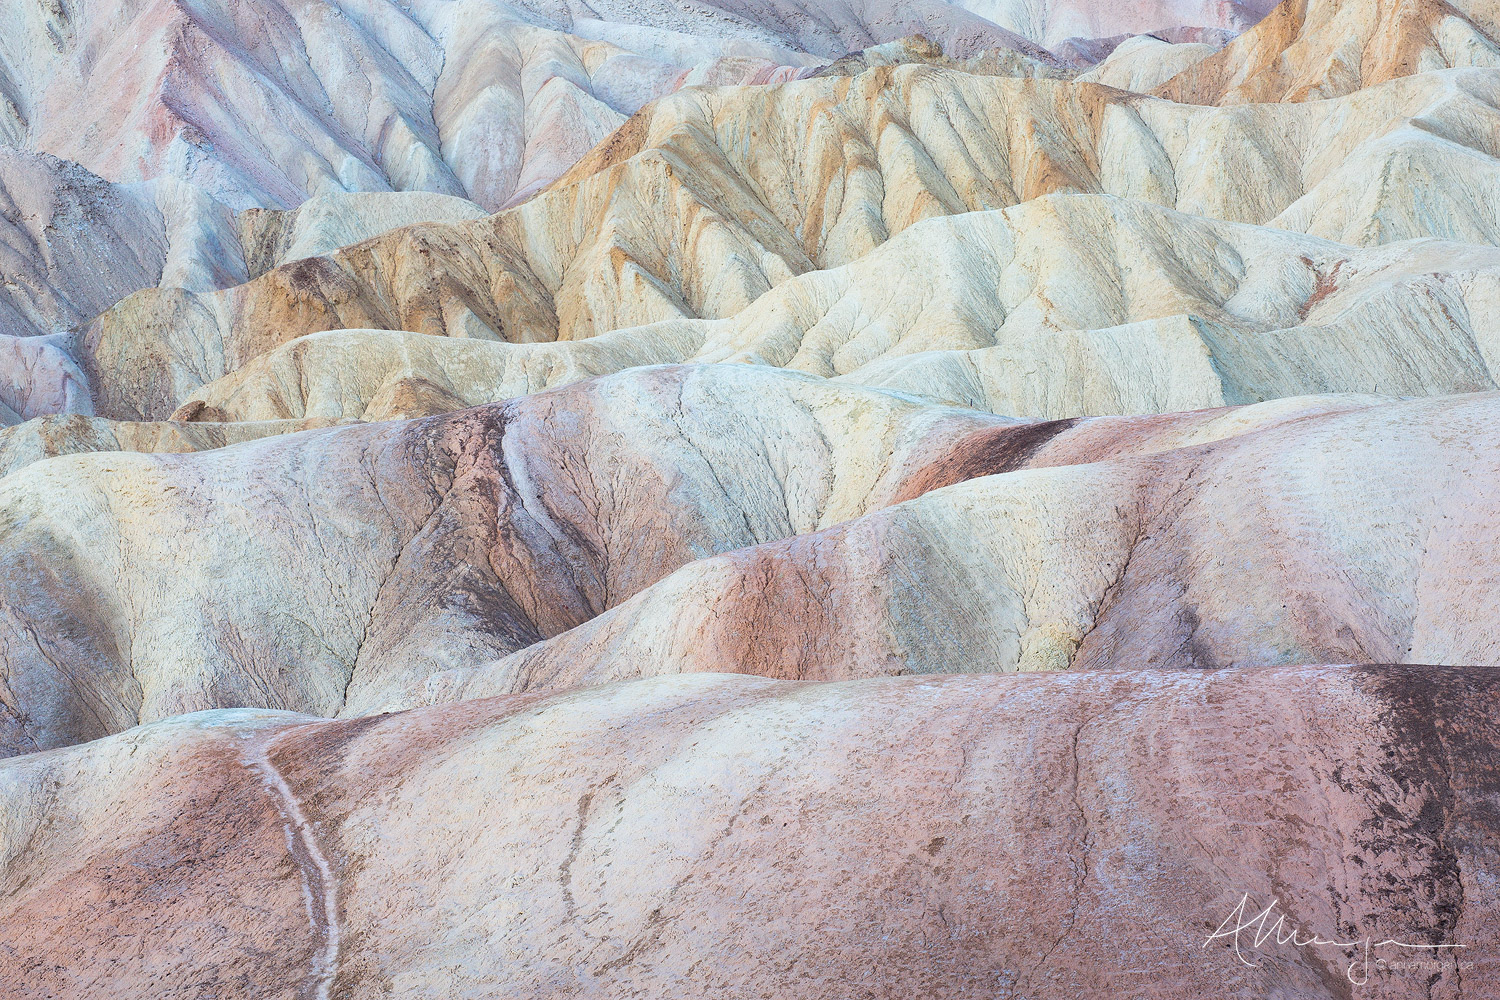 Close up view of geological formations at Zabriskie point, Death Valley